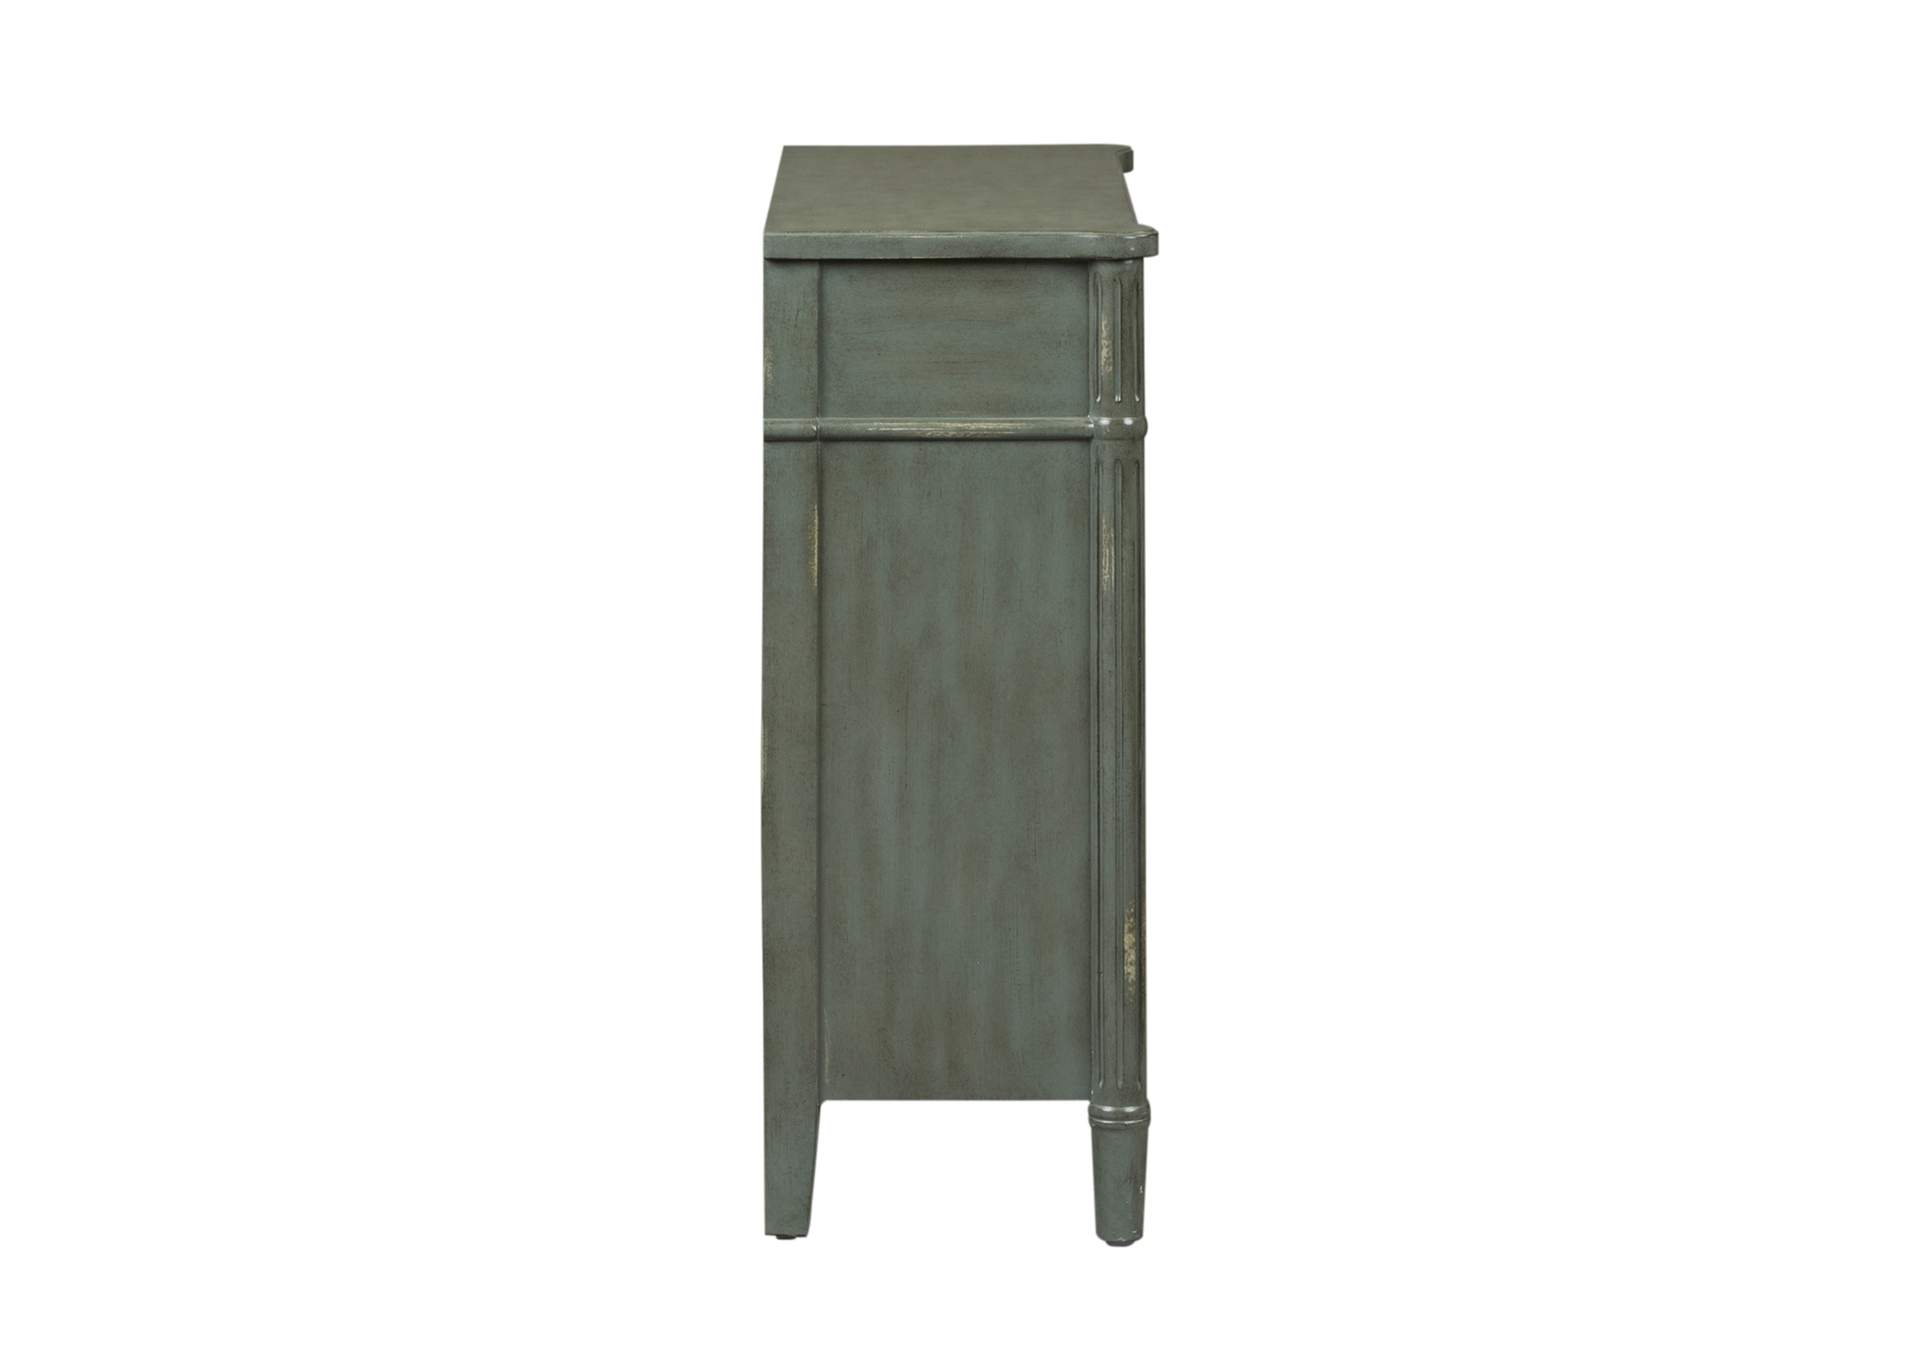 Madison Park 1 Drawer 2 Door Accent Cabinet,Liberty